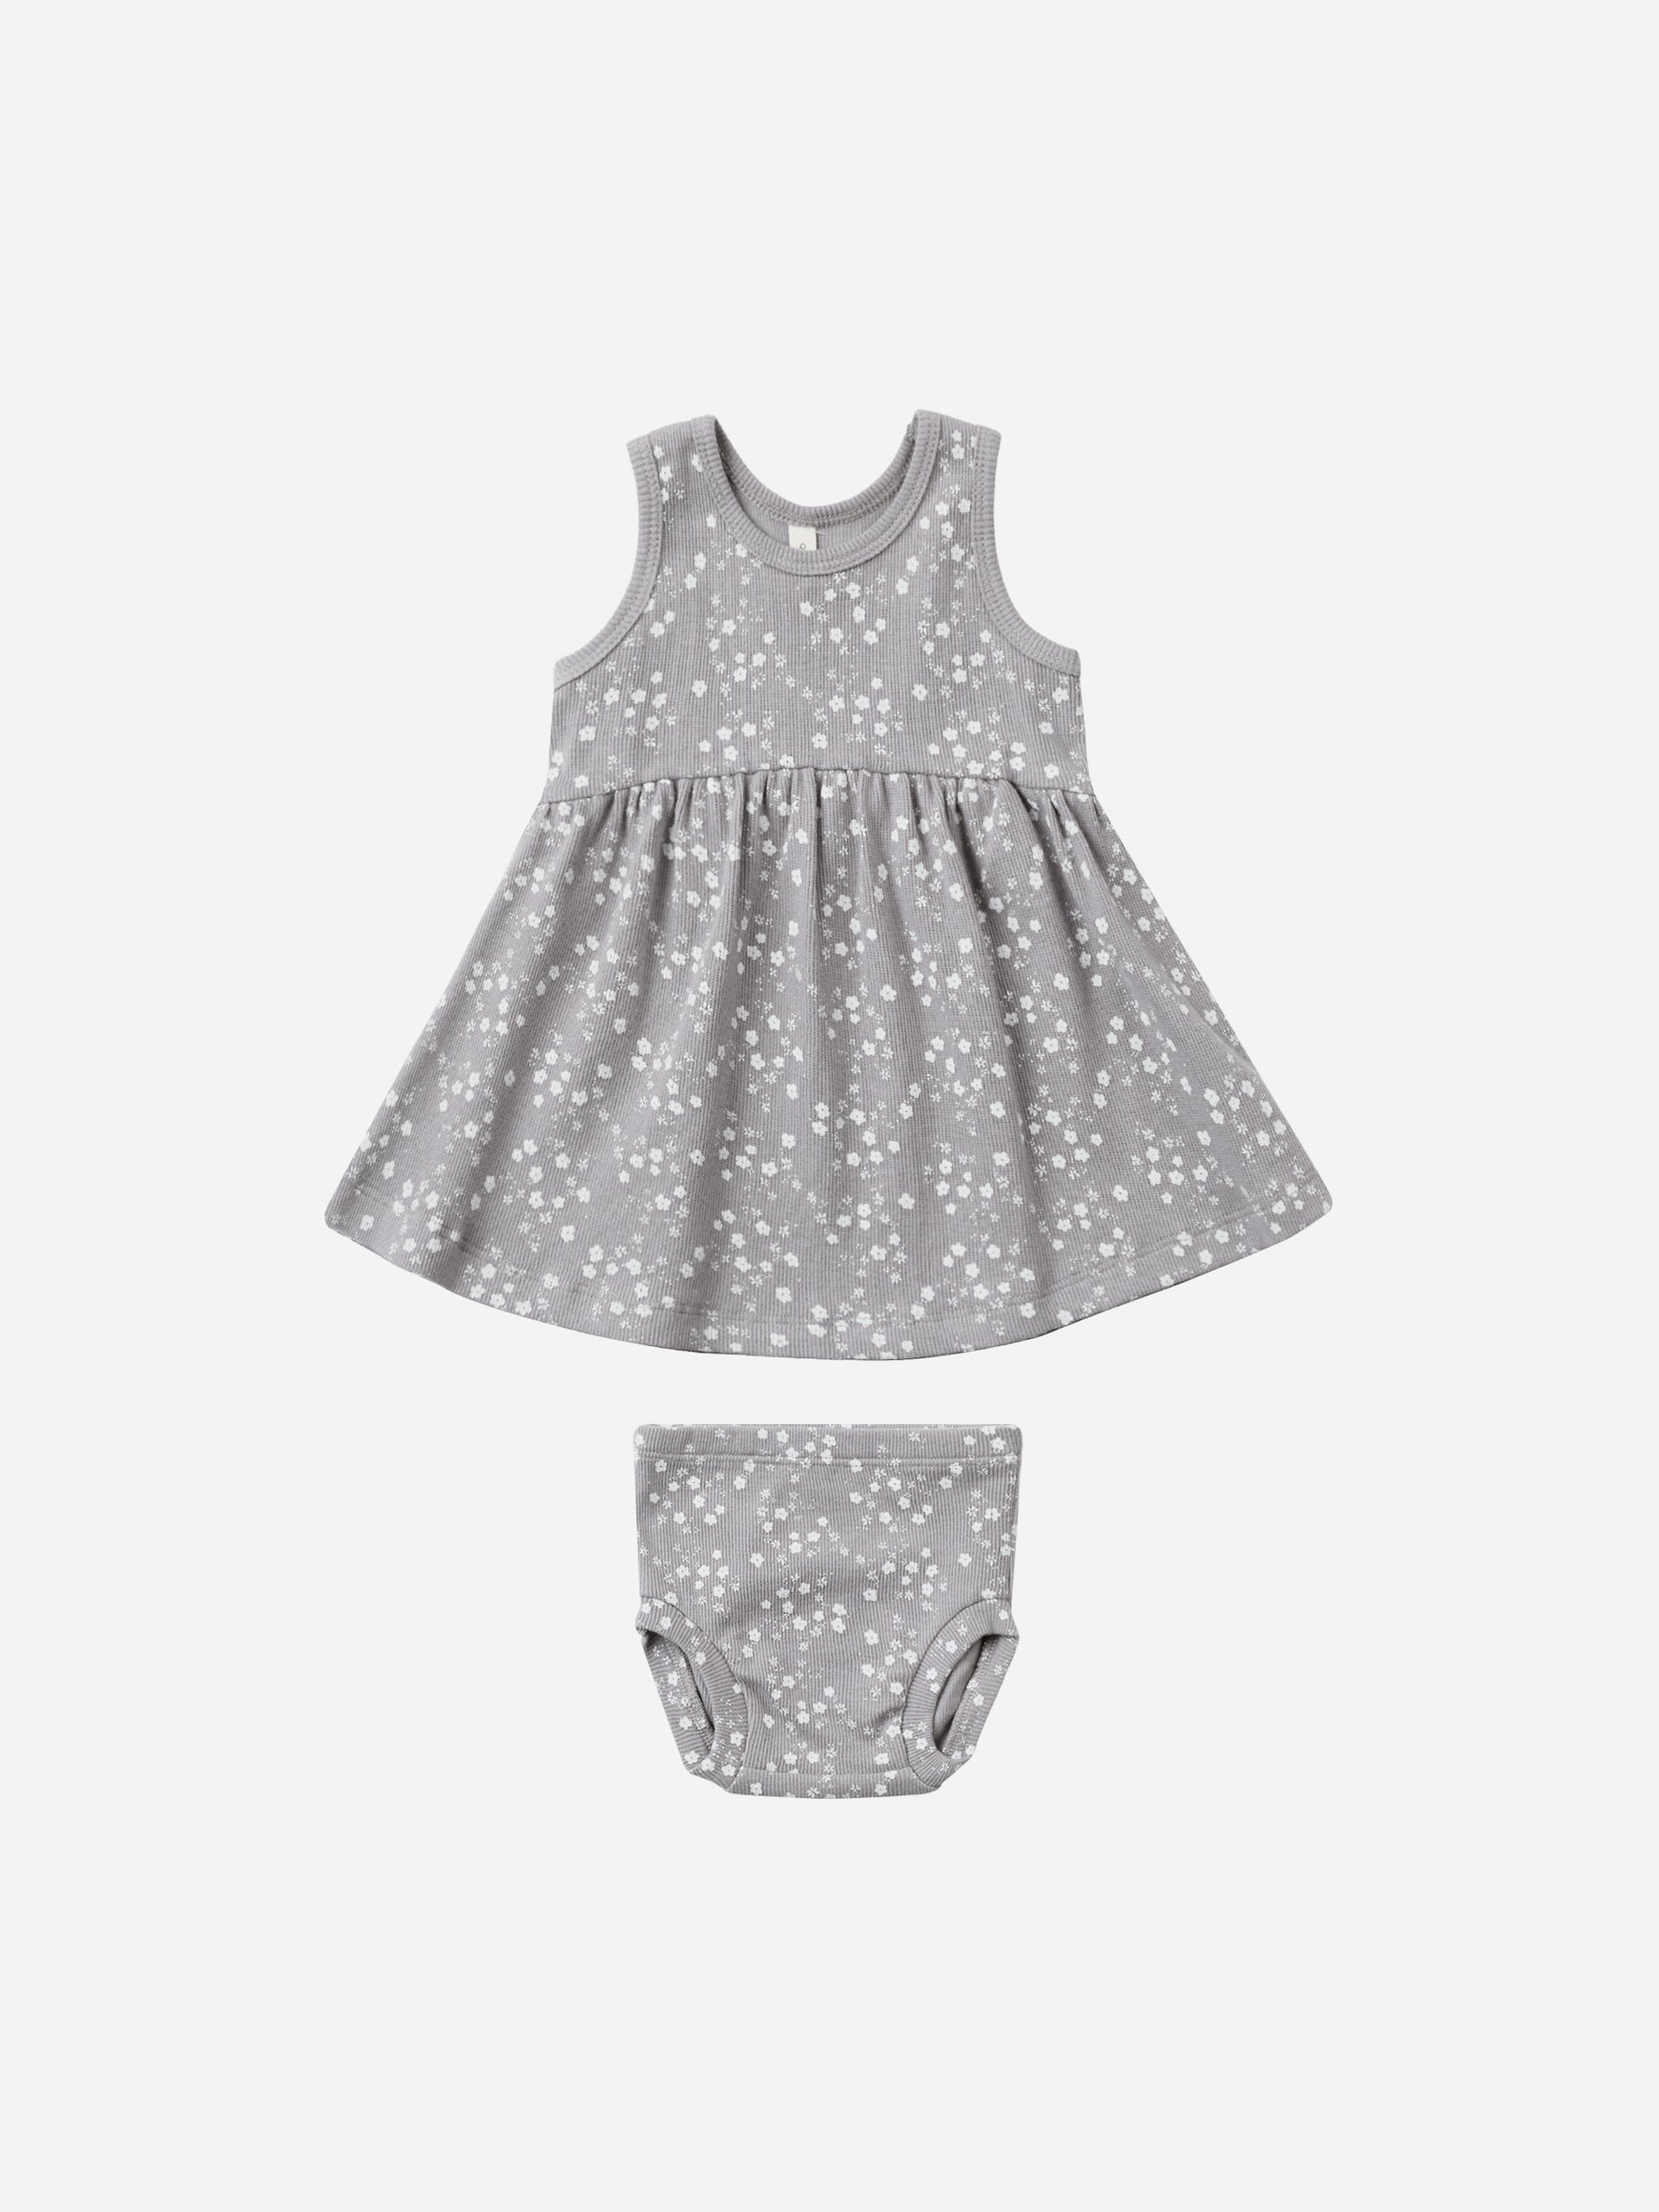 Ribbed Tank Dress || Fleur - Rylee + Cru | Kids Clothes | Trendy Baby Clothes | Modern Infant Outfits |